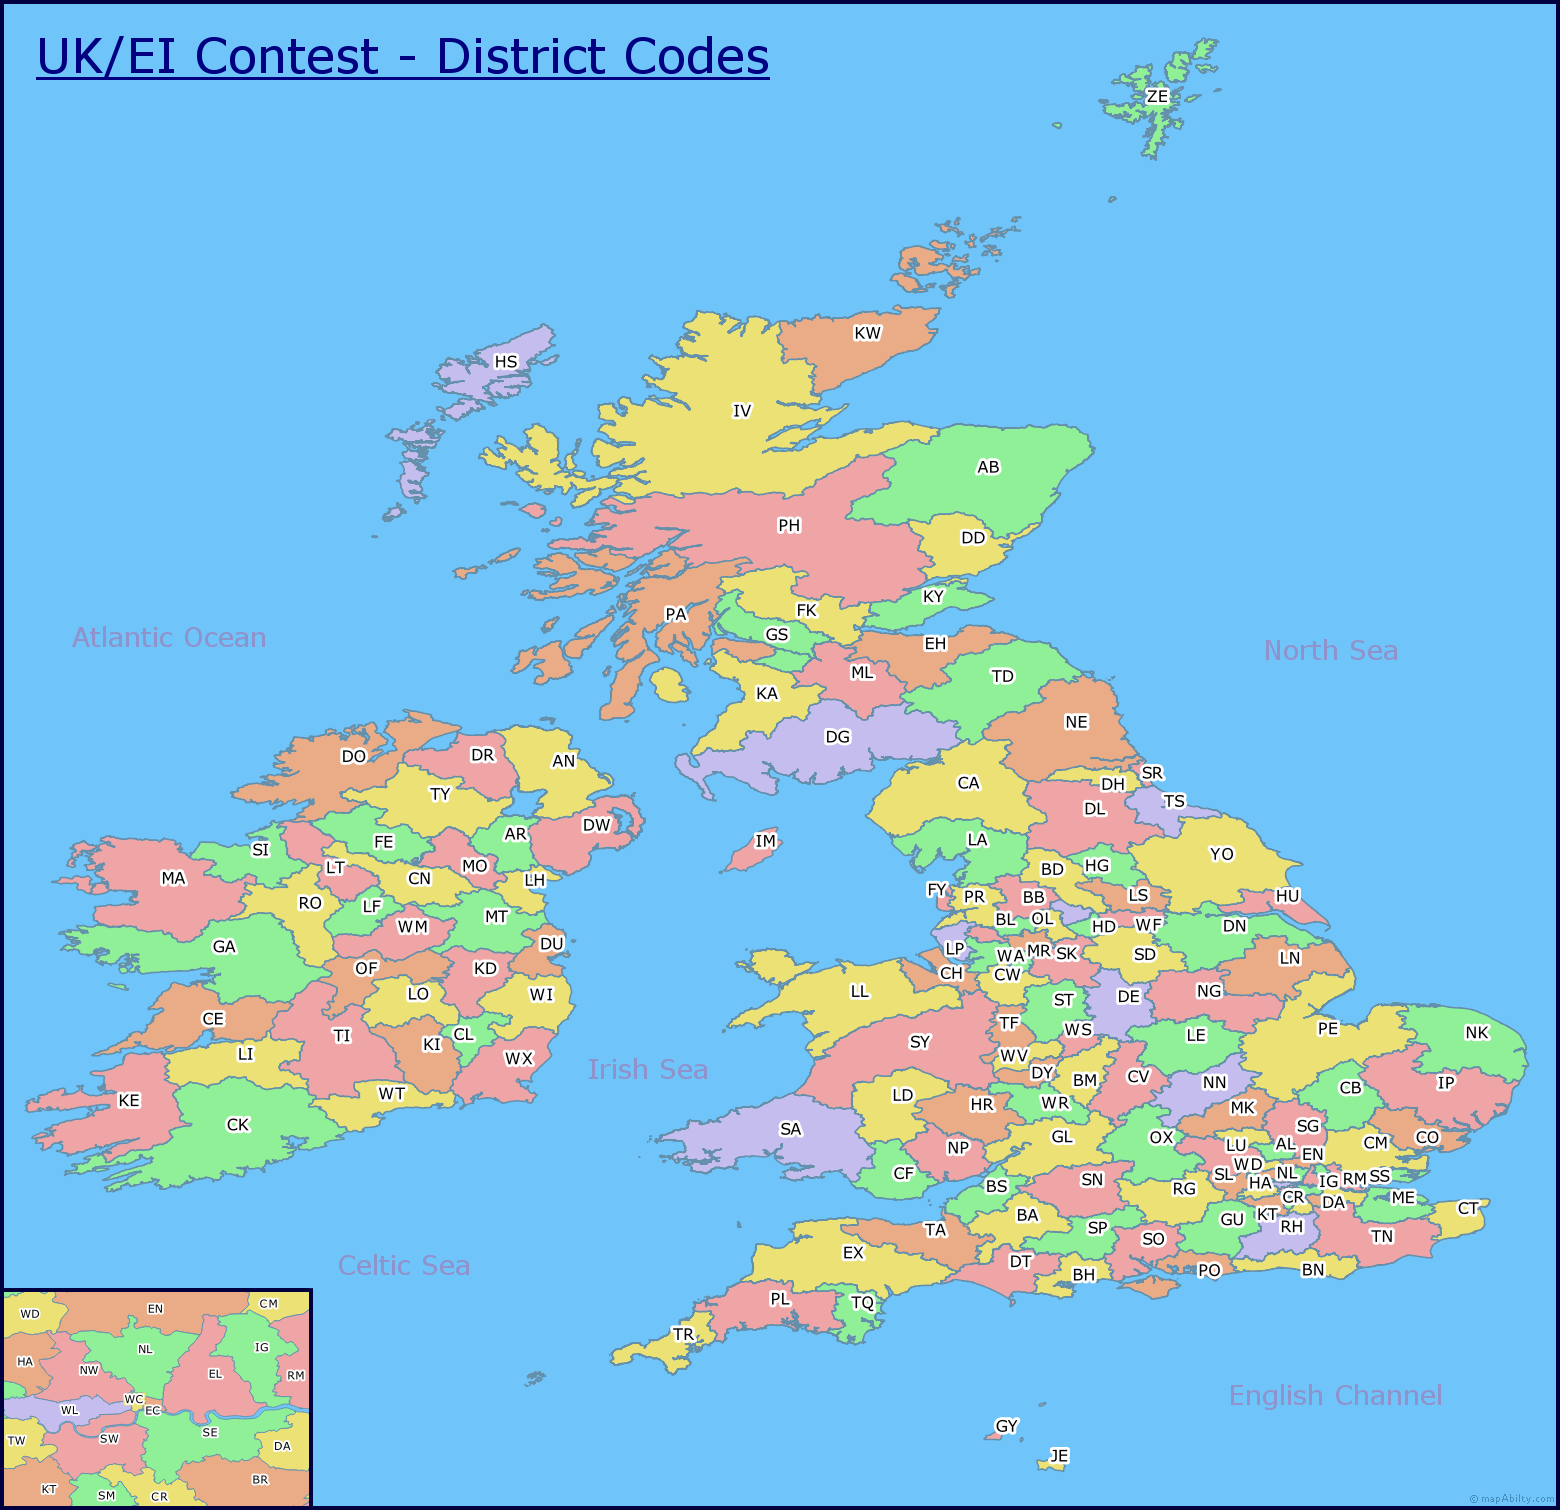 EICC District Code Map for the EI/CC Contest